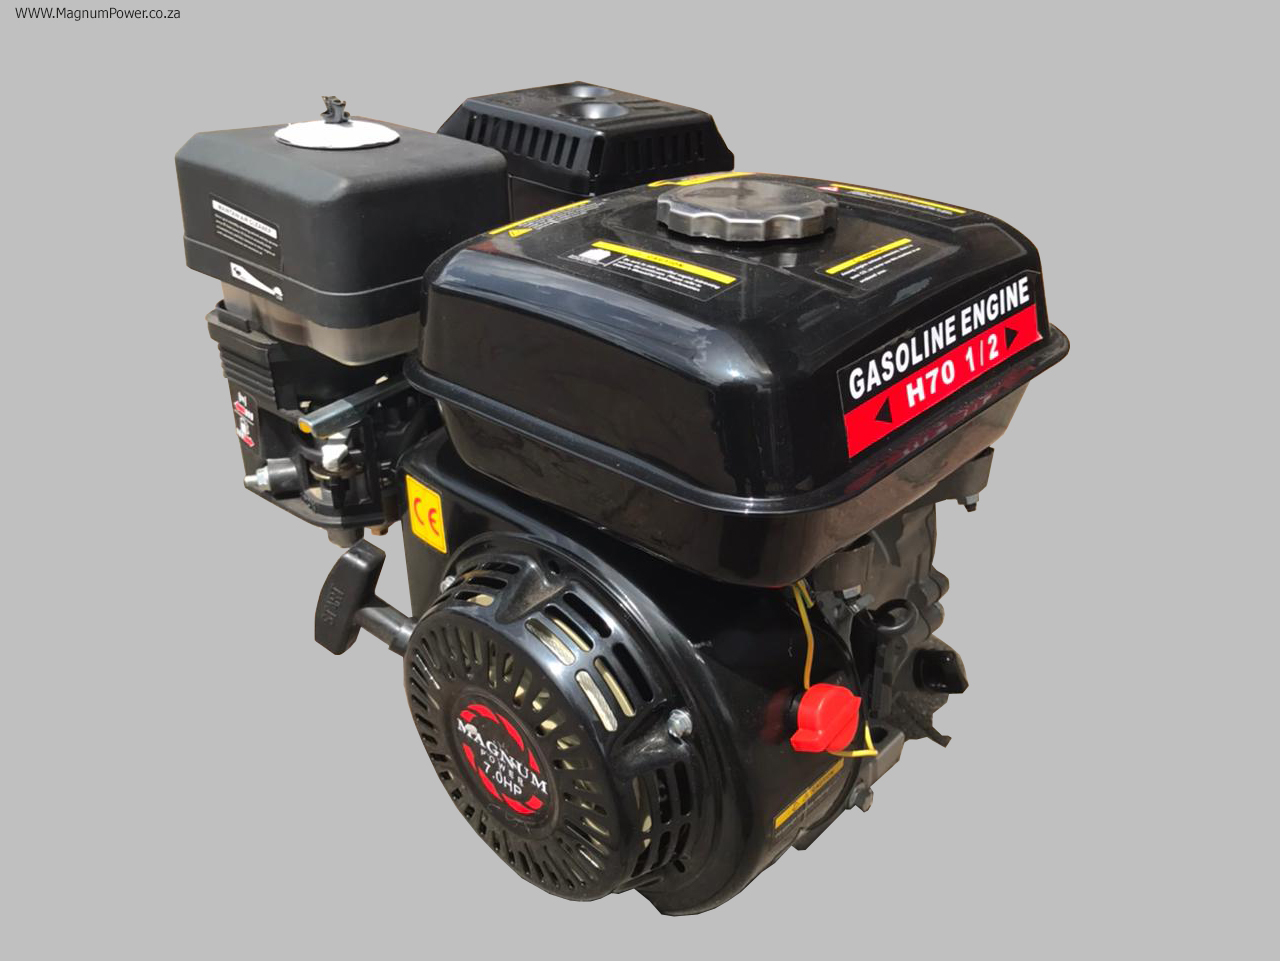 Petrol Engine 7hp Petrol Engine with 2:1 Reduction Box Price incl Vat